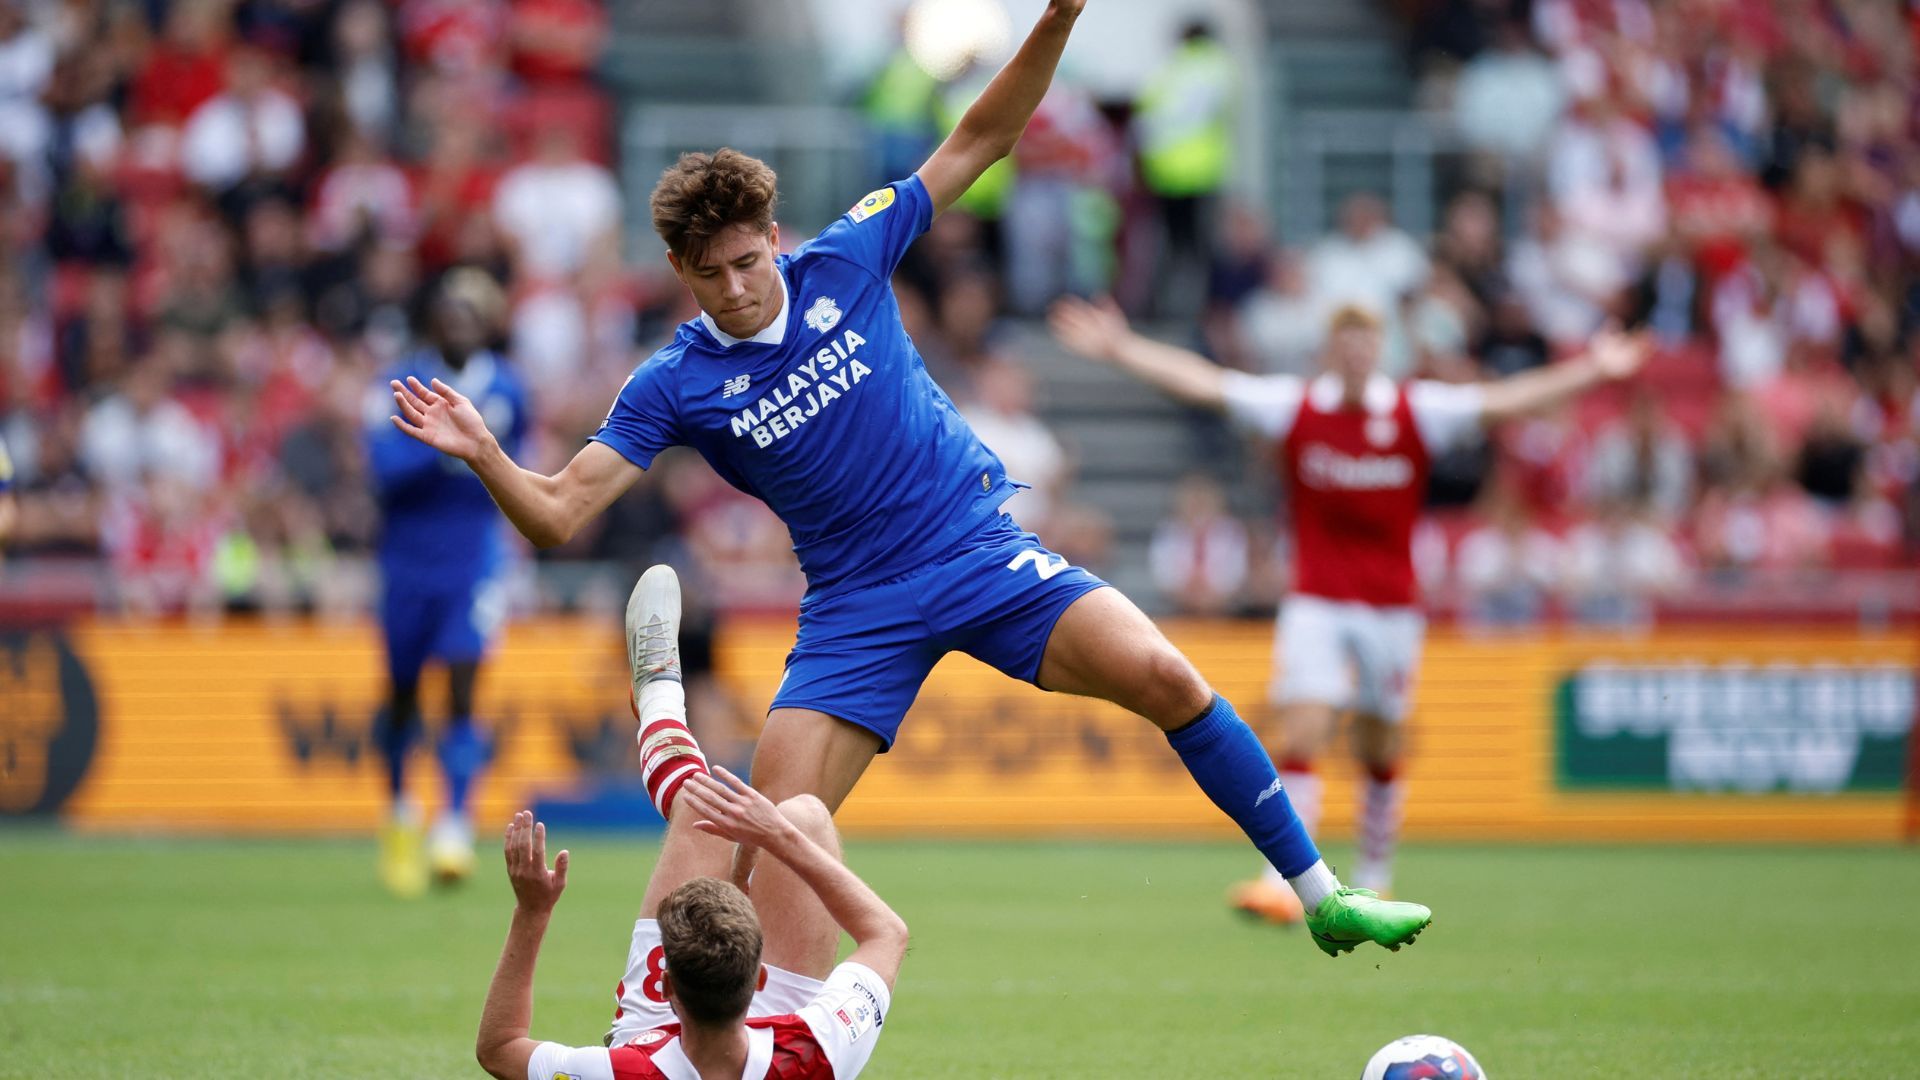 Can easily play Premier League football" - Rubin Colwill claim made as Ipswich  Town eye Cardiff City ace